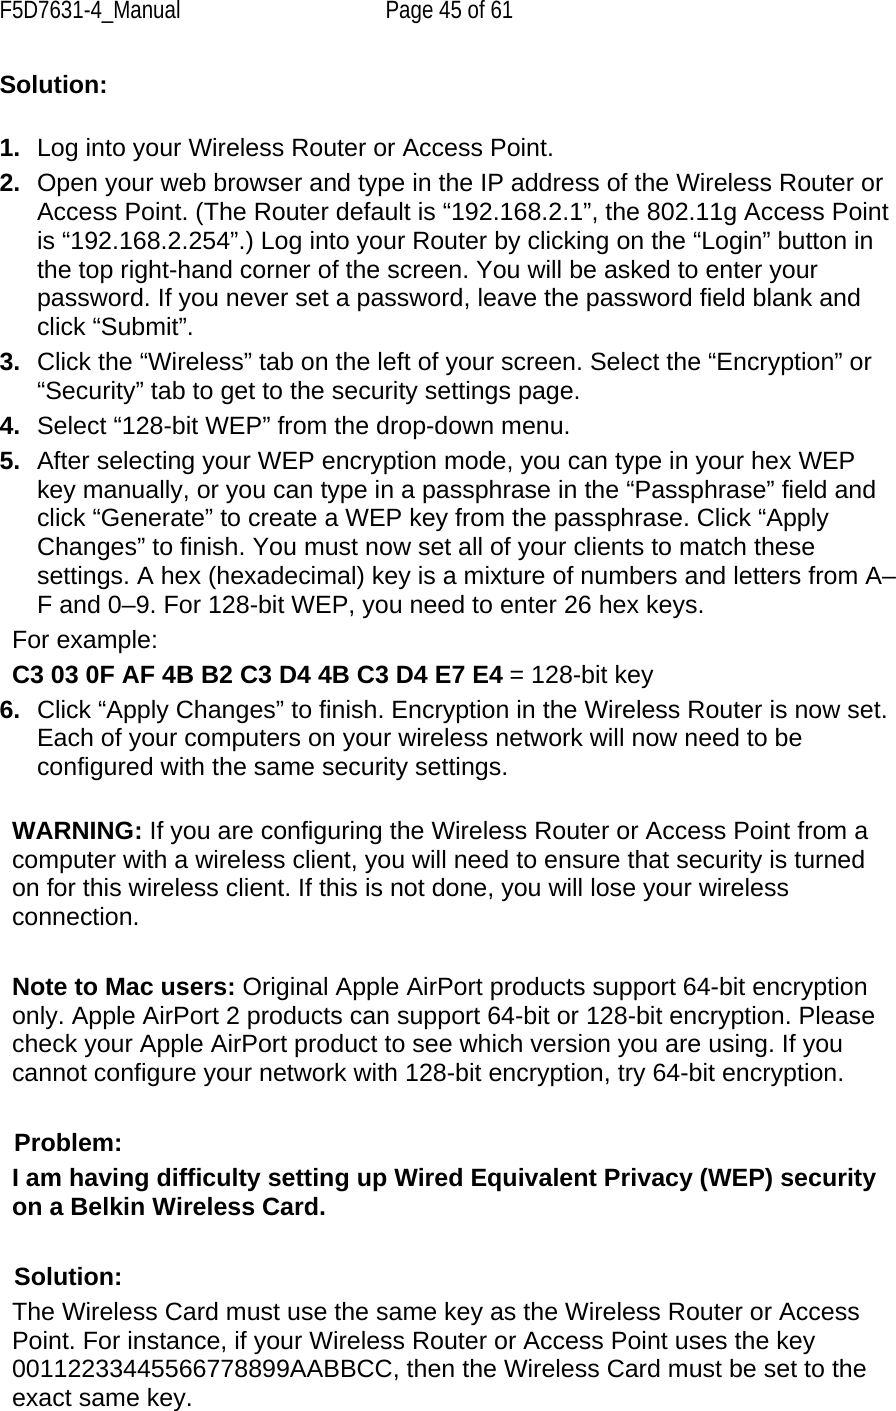 F5D7631-4_Manual  Page 45 of 61 Solution:   1.  Log into your Wireless Router or Access Point.  2.  Open your web browser and type in the IP address of the Wireless Router or Access Point. (The Router default is “192.168.2.1”, the 802.11g Access Point is “192.168.2.254”.) Log into your Router by clicking on the “Login” button in the top right-hand corner of the screen. You will be asked to enter your password. If you never set a password, leave the password field blank and click “Submit”.  3.  Click the “Wireless” tab on the left of your screen. Select the “Encryption” or “Security” tab to get to the security settings page. 4.  Select “128-bit WEP” from the drop-down menu. 5.  After selecting your WEP encryption mode, you can type in your hex WEP key manually, or you can type in a passphrase in the “Passphrase” field and click “Generate” to create a WEP key from the passphrase. Click “Apply Changes” to finish. You must now set all of your clients to match these settings. A hex (hexadecimal) key is a mixture of numbers and letters from A–F and 0–9. For 128-bit WEP, you need to enter 26 hex keys.  For example:  C3 03 0F AF 4B B2 C3 D4 4B C3 D4 E7 E4 = 128-bit key 6.  Click “Apply Changes” to finish. Encryption in the Wireless Router is now set. Each of your computers on your wireless network will now need to be configured with the same security settings.  WARNING: If you are configuring the Wireless Router or Access Point from a computer with a wireless client, you will need to ensure that security is turned on for this wireless client. If this is not done, you will lose your wireless connection.  Note to Mac users: Original Apple AirPort products support 64-bit encryption only. Apple AirPort 2 products can support 64-bit or 128-bit encryption. Please check your Apple AirPort product to see which version you are using. If you cannot configure your network with 128-bit encryption, try 64-bit encryption.   Problem:  I am having difficulty setting up Wired Equivalent Privacy (WEP) security on a Belkin Wireless Card.  Solution: The Wireless Card must use the same key as the Wireless Router or Access Point. For instance, if your Wireless Router or Access Point uses the key 00112233445566778899AABBCC, then the Wireless Card must be set to the exact same key. 